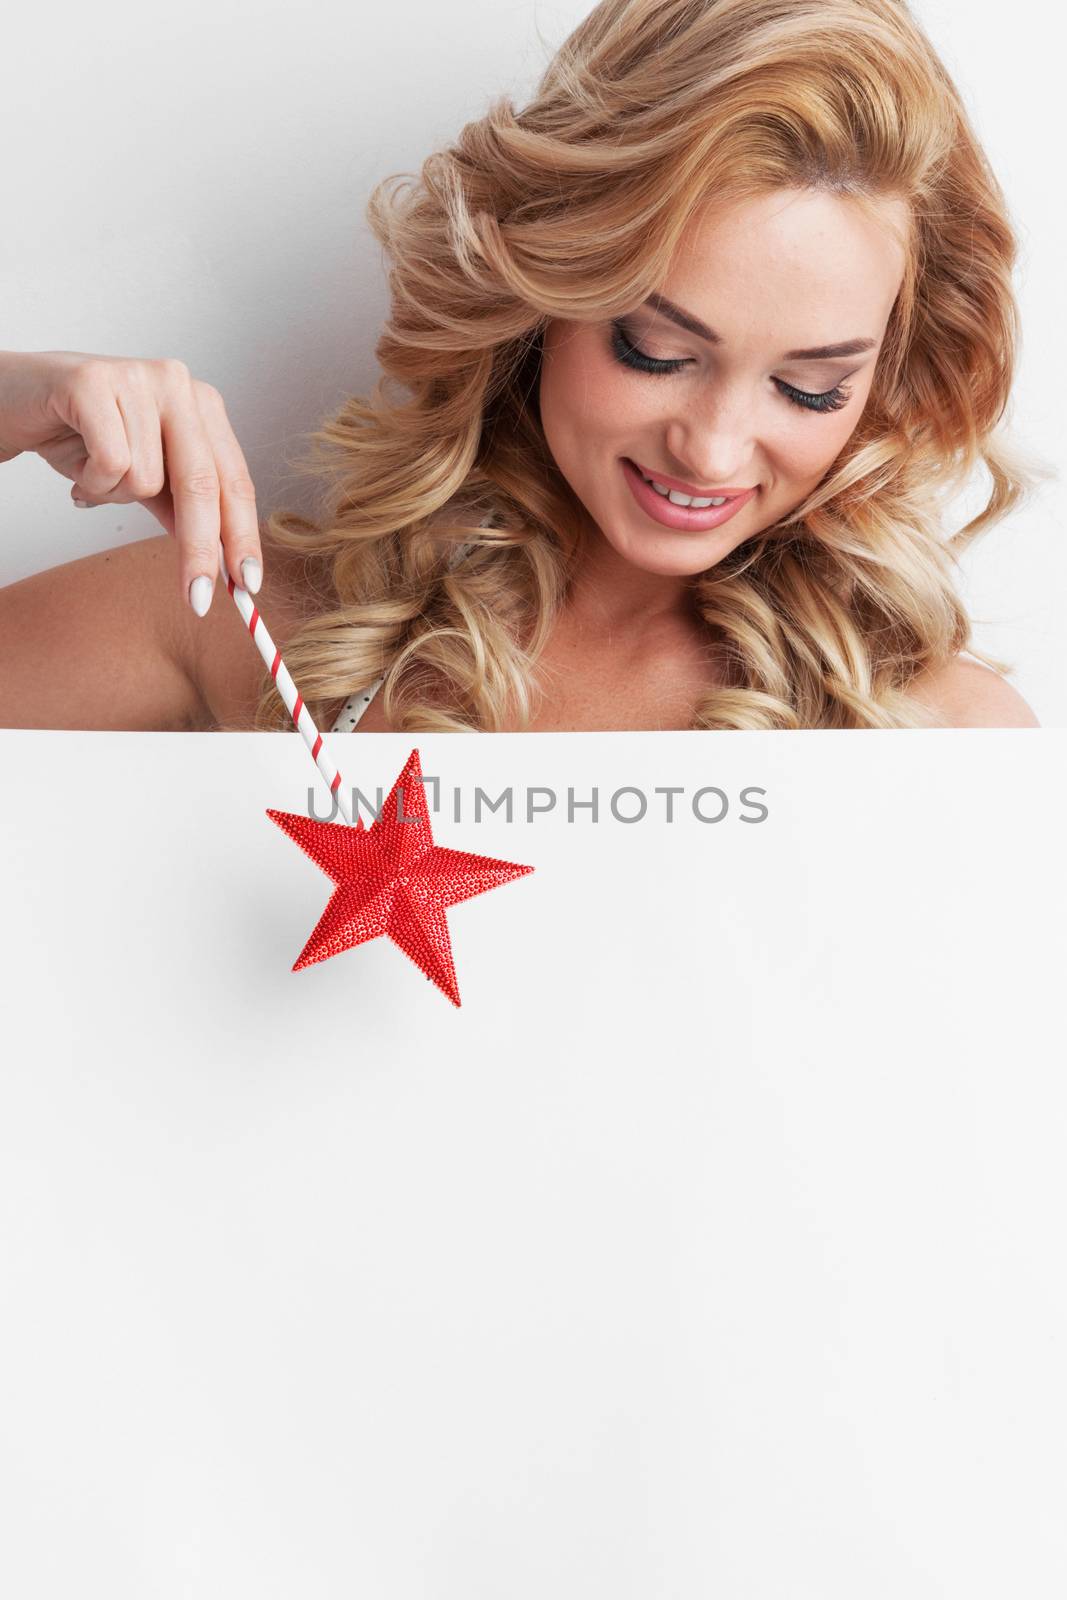 Fairy woman with magic wand with star pointing at white background